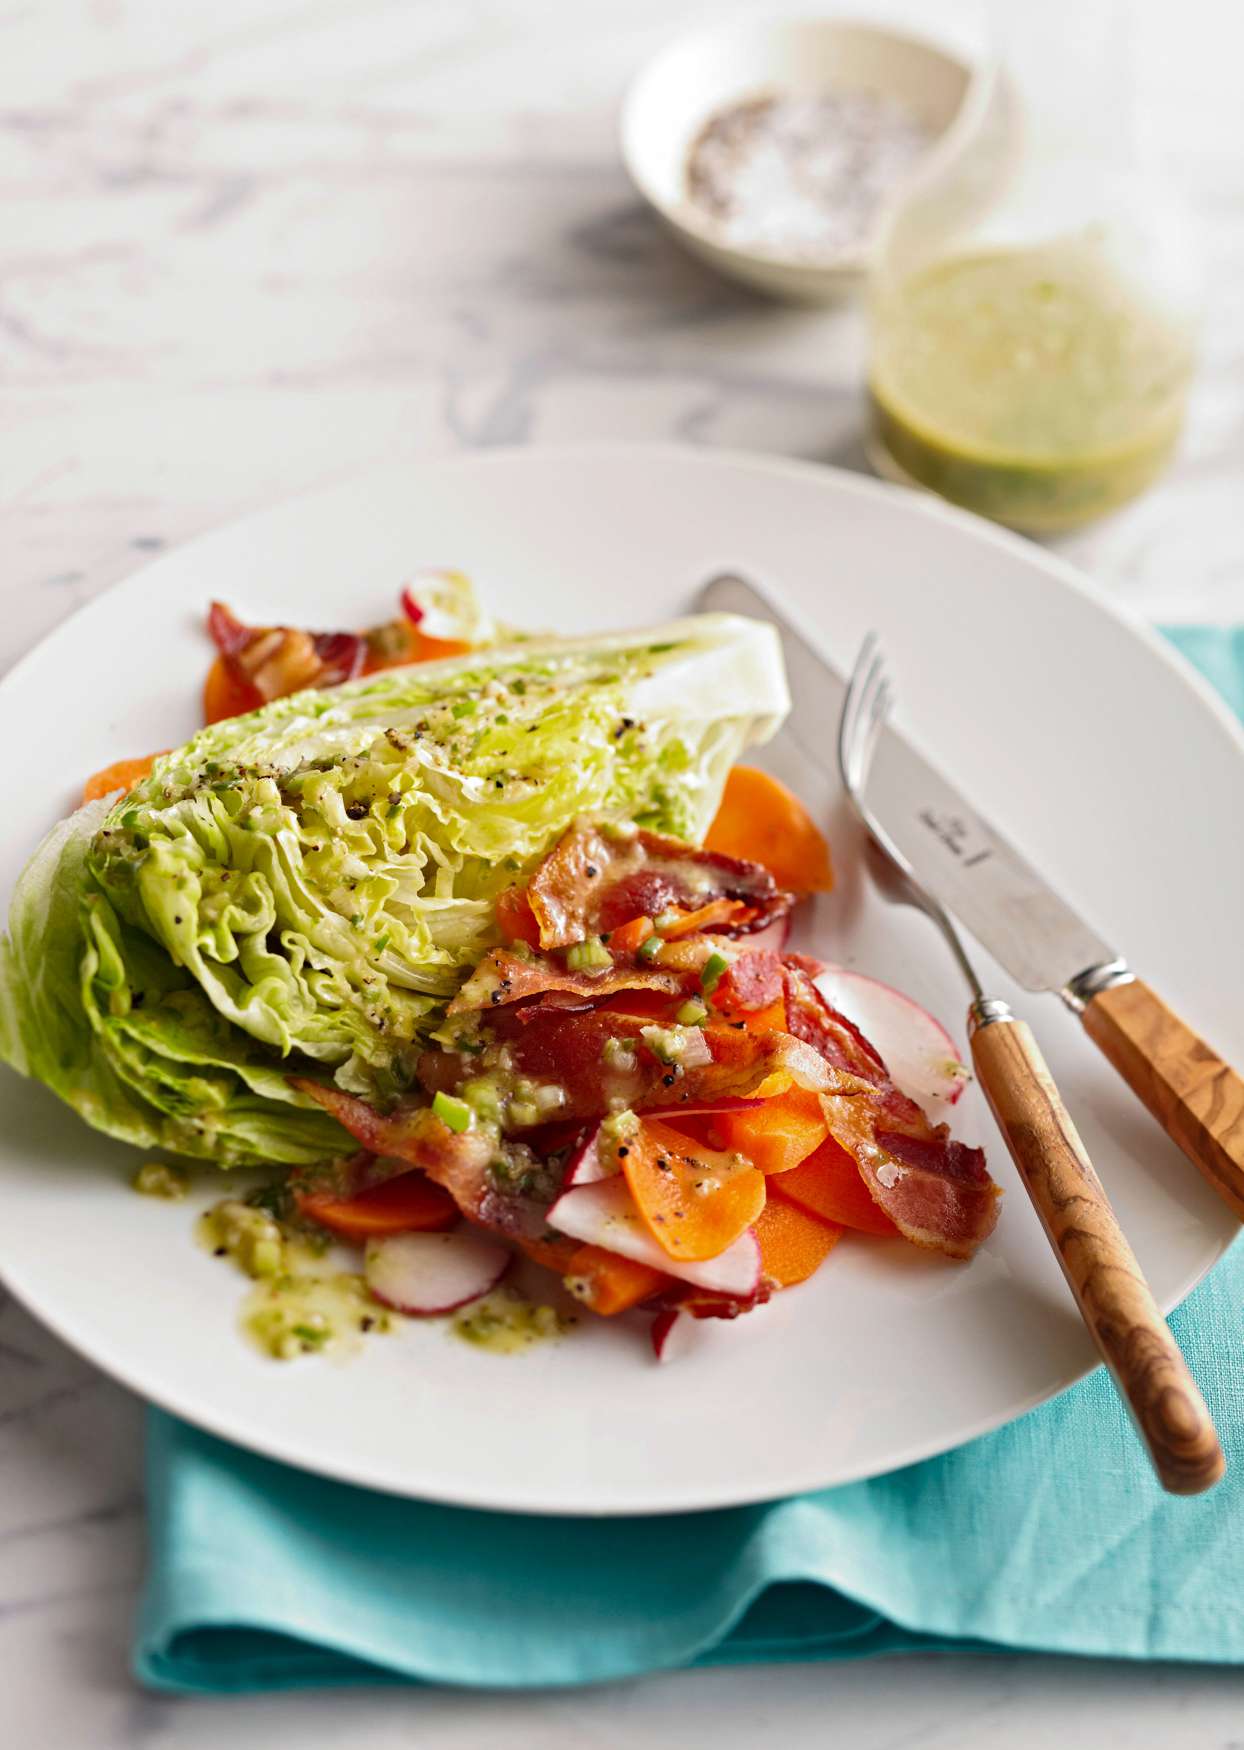 Iceberg Wedge Salad with Bacon, Carrots, and Radishes